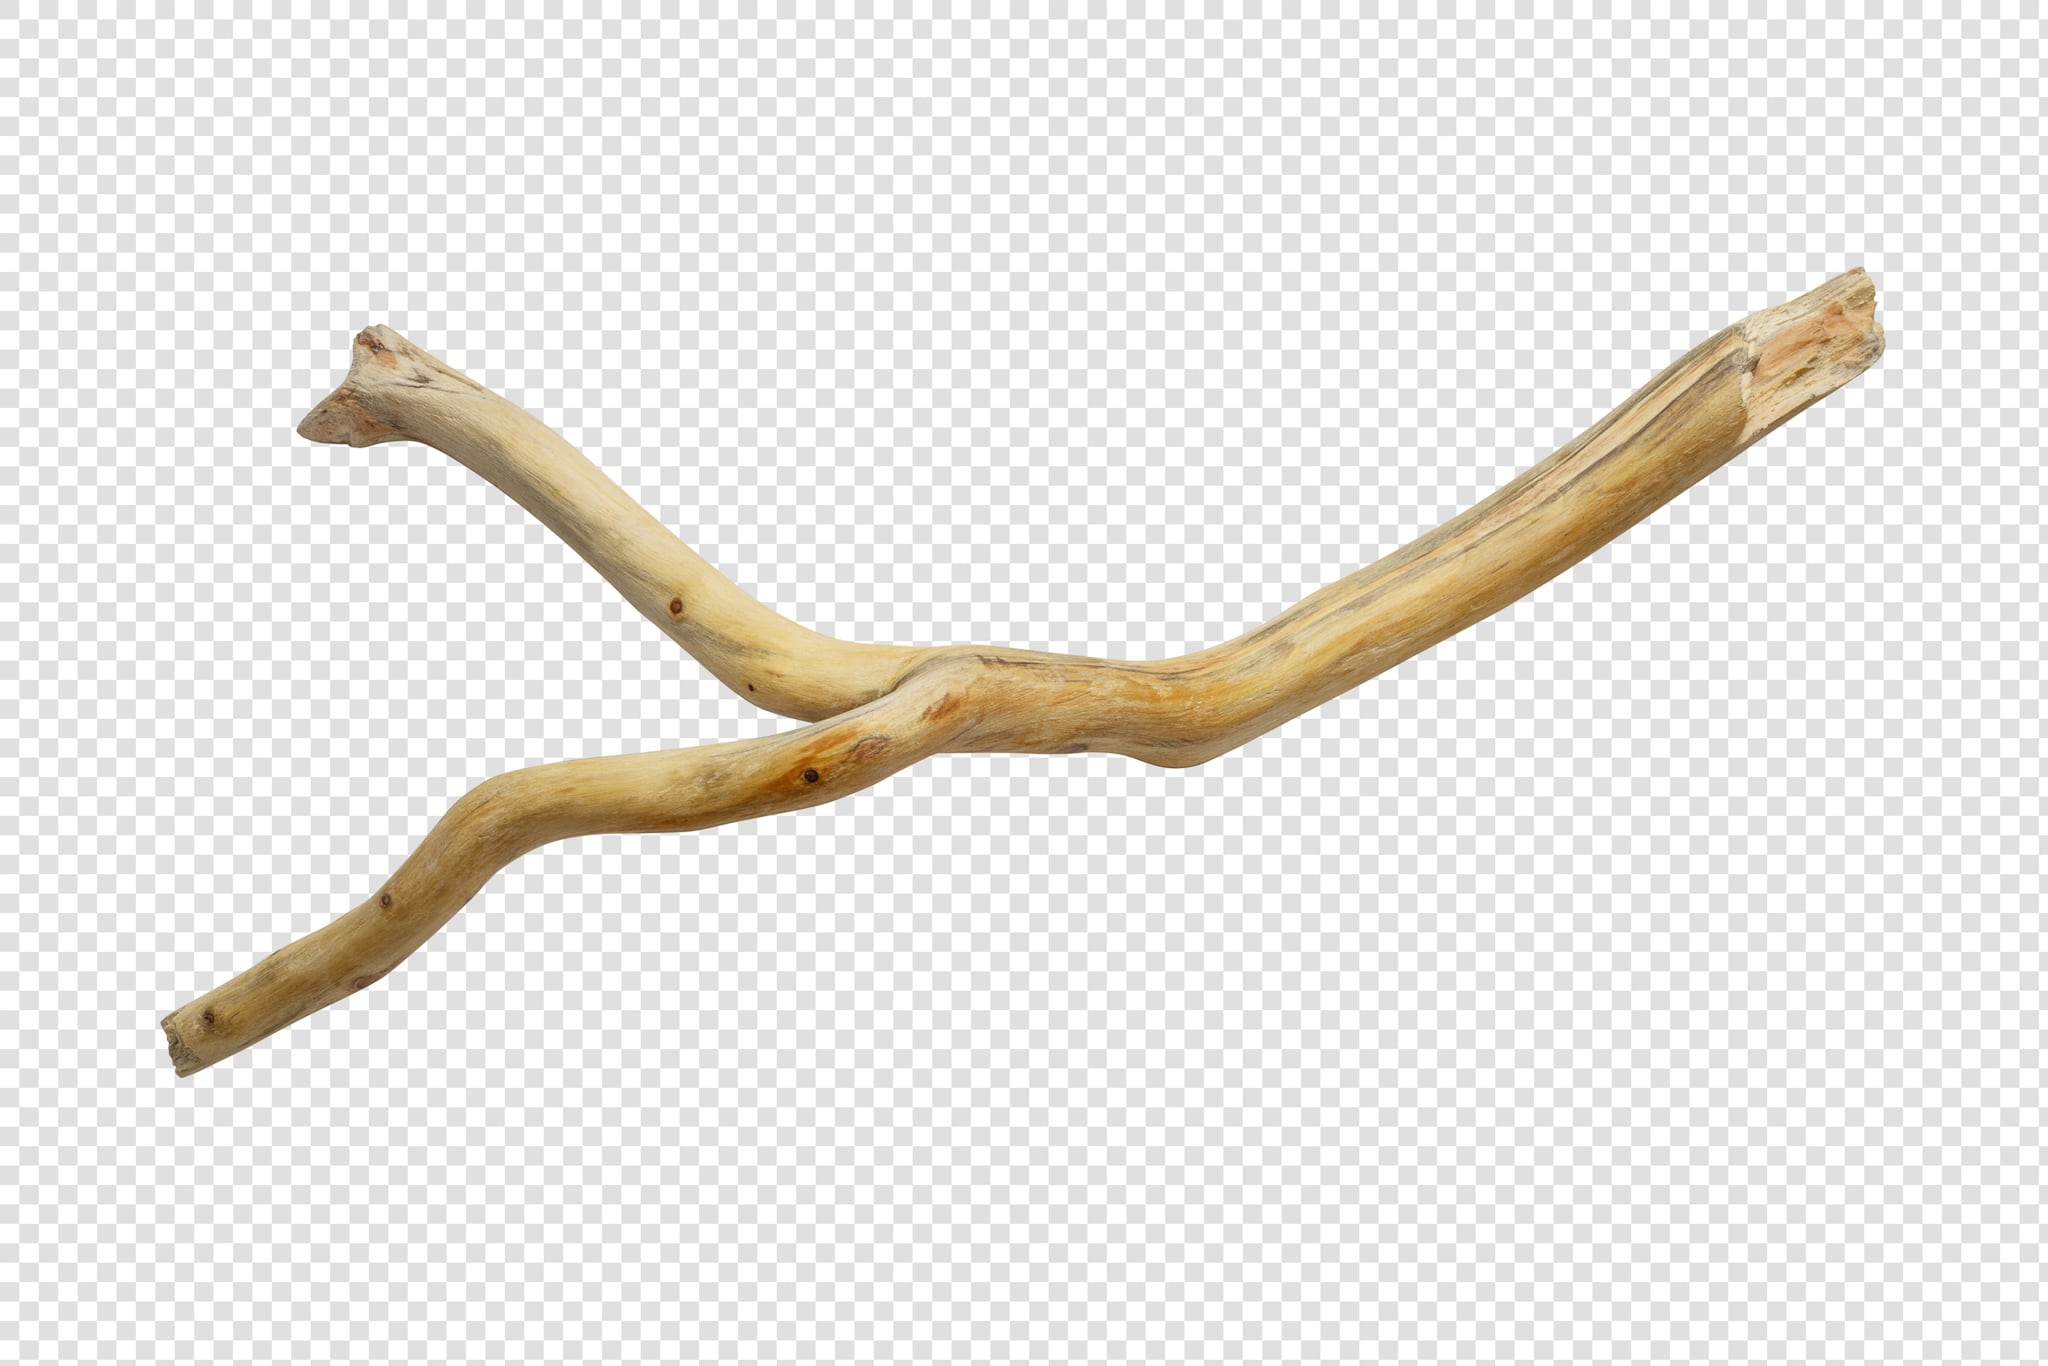 Clean Isolated PSD image of Wooden stick on transparent background with separated shadow